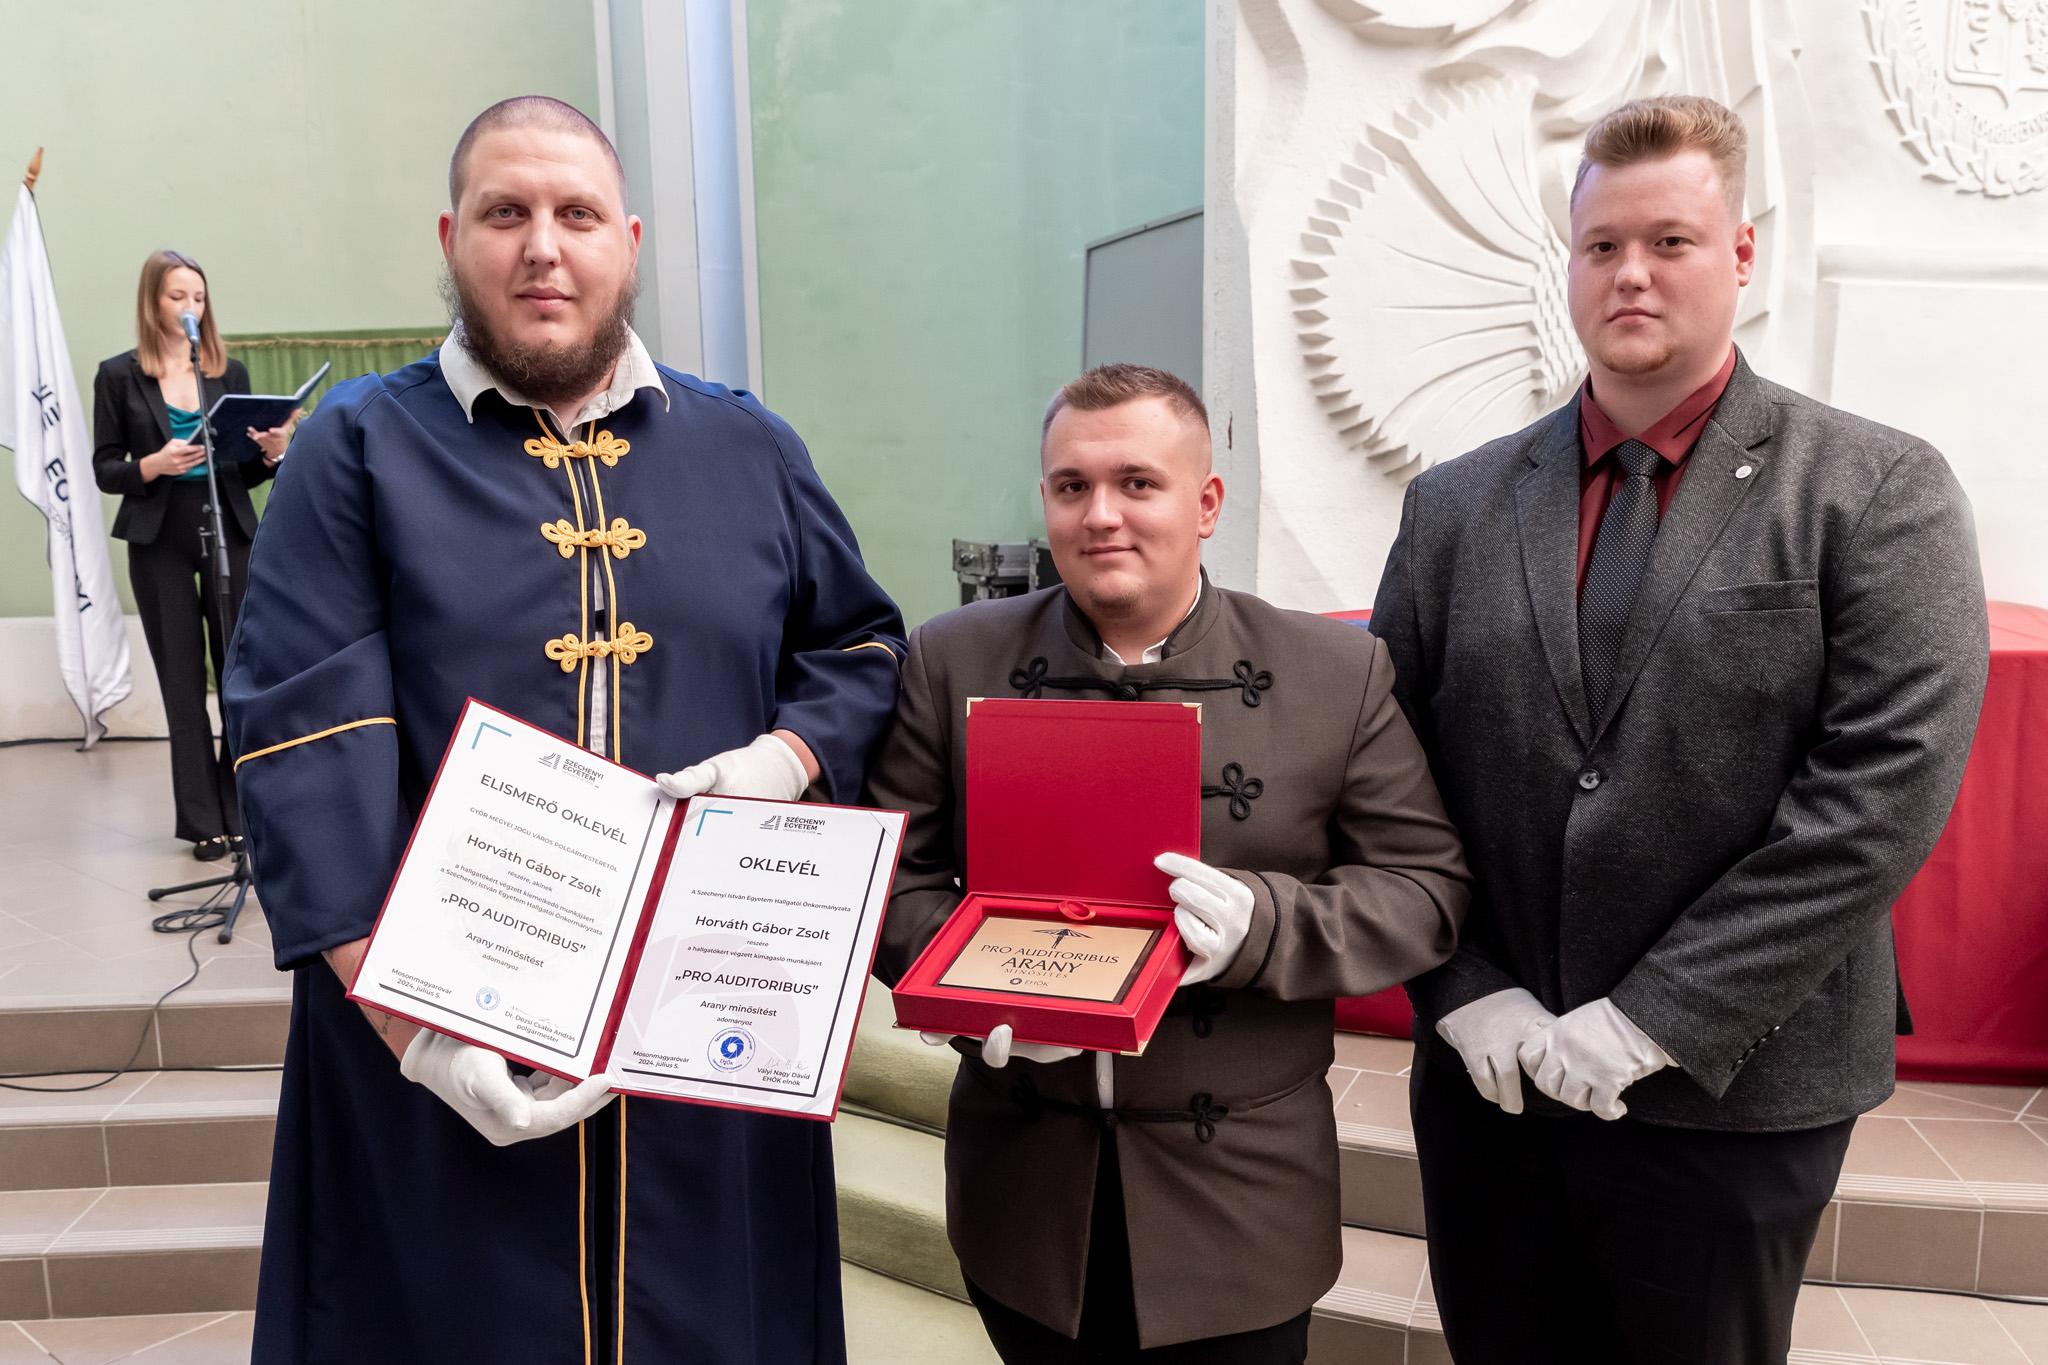 Gábor Zsolt Horváth, certified agricultural engineer and former president of the faculty's student council, received the Pro Auditoribus award with gold distinction